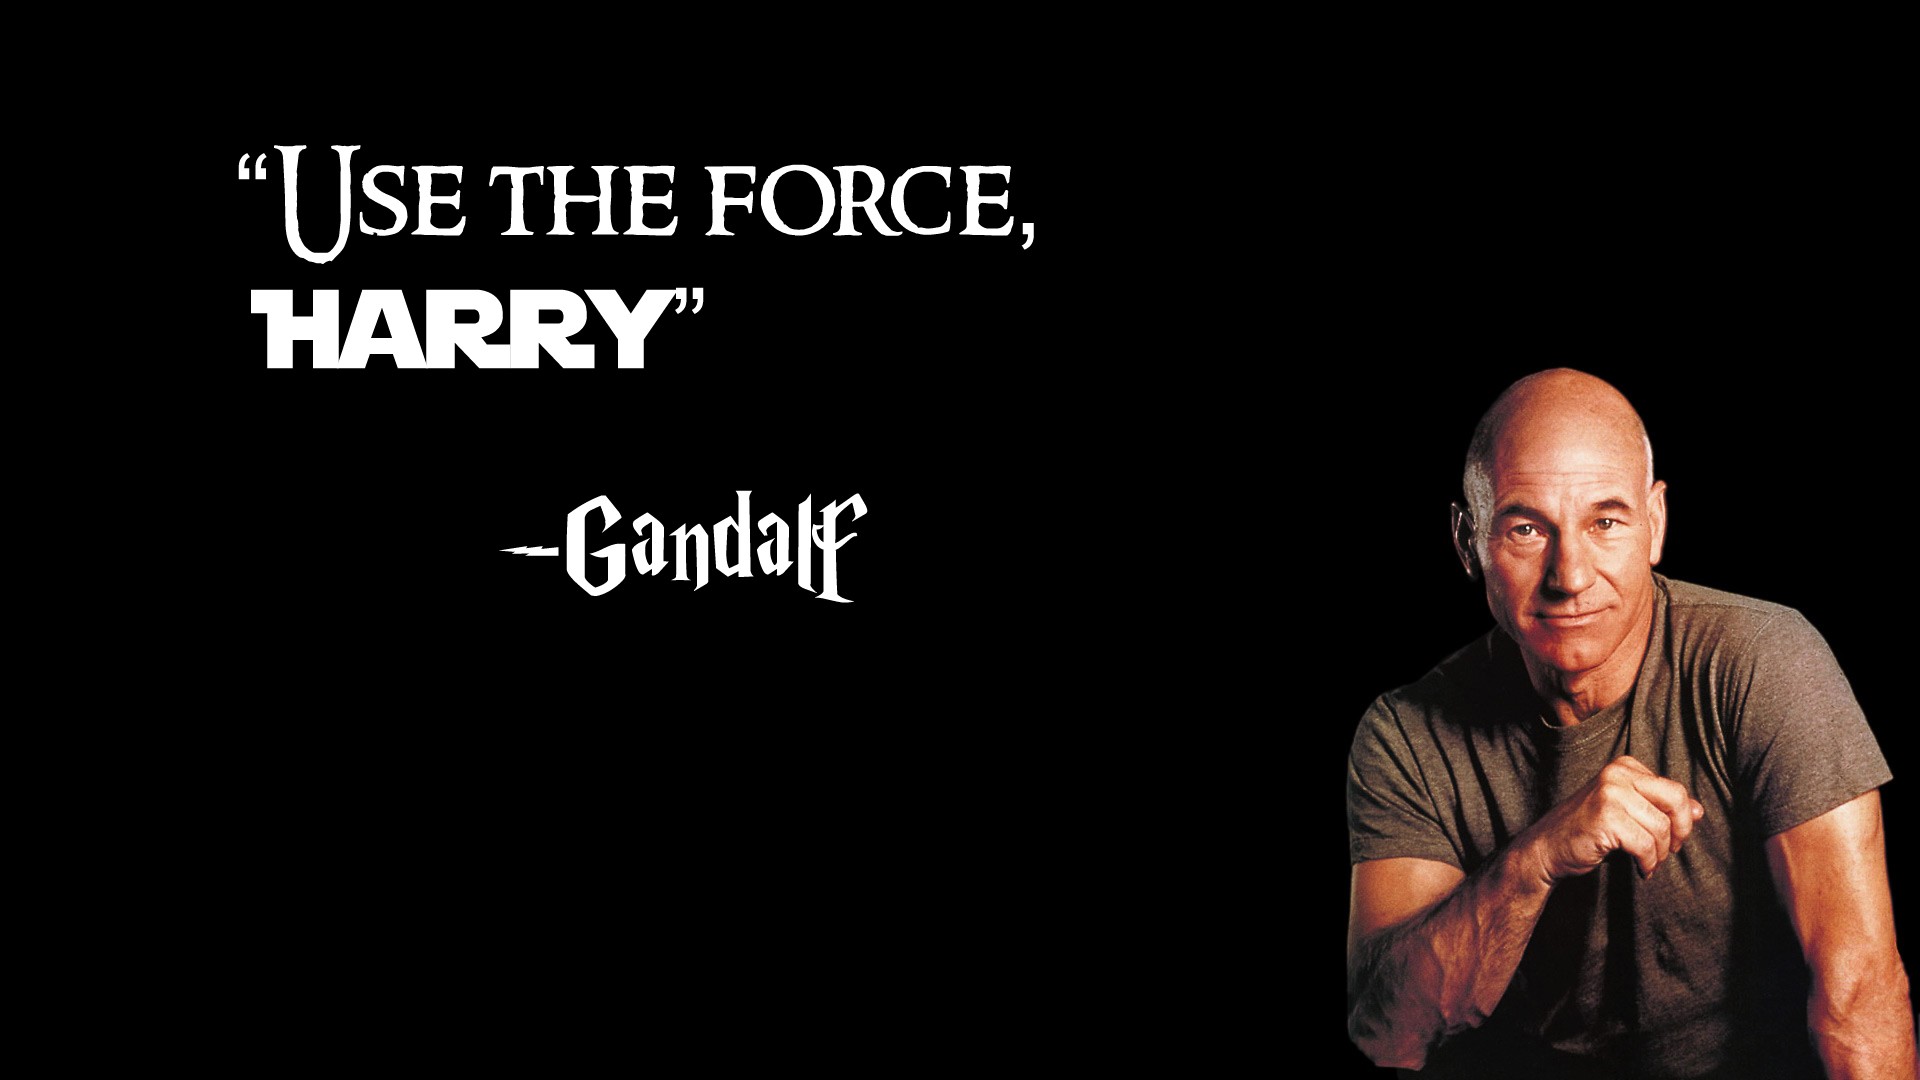 star, Wars, Black, Gandalf, X men, Quotes, Fail, Funny, Jedi, The, Lord, Of, The, Rings, Harry, Potter, Patrick, Stewart, Tagnotallowedtoosubjective, Black, Background Wallpaper